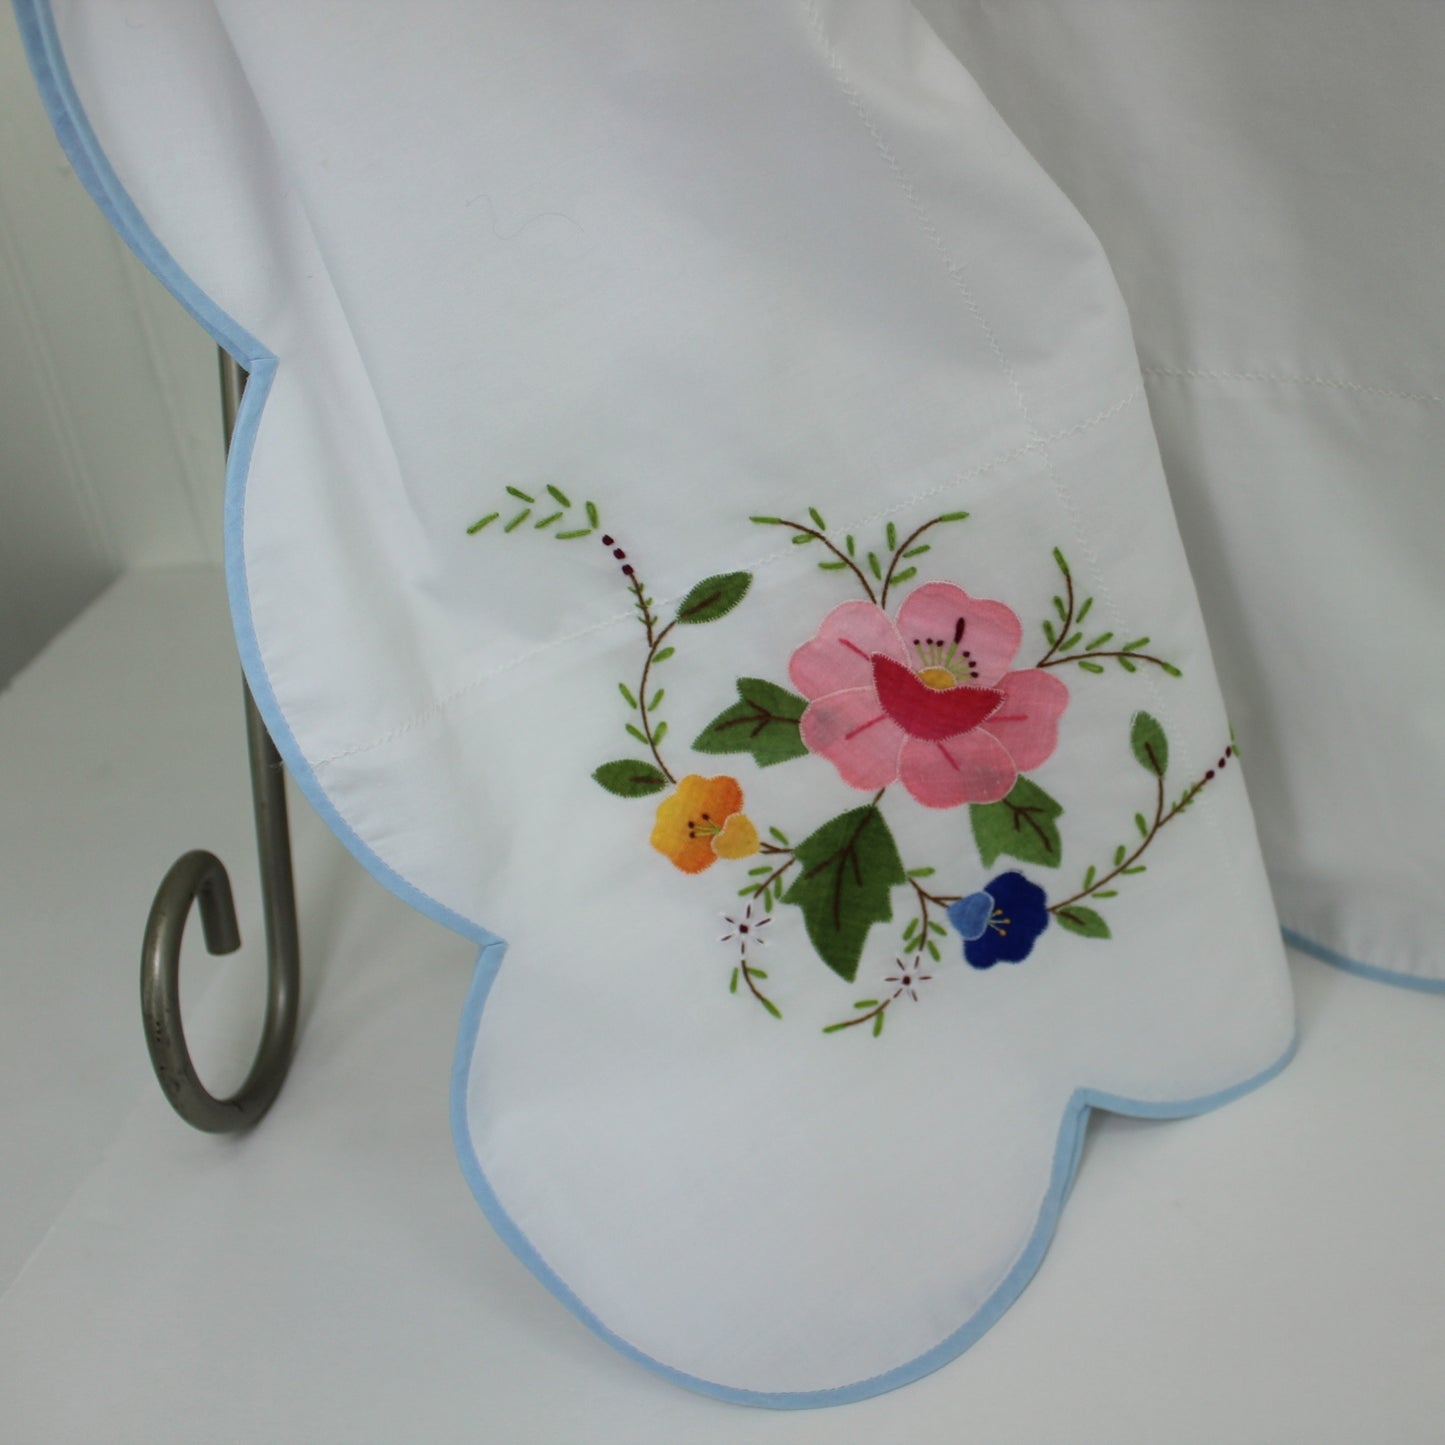 White Cotton Tablecloth Flower Applique Embroidery Blue Scallop Border 67" X 50" center rectangle of flowers